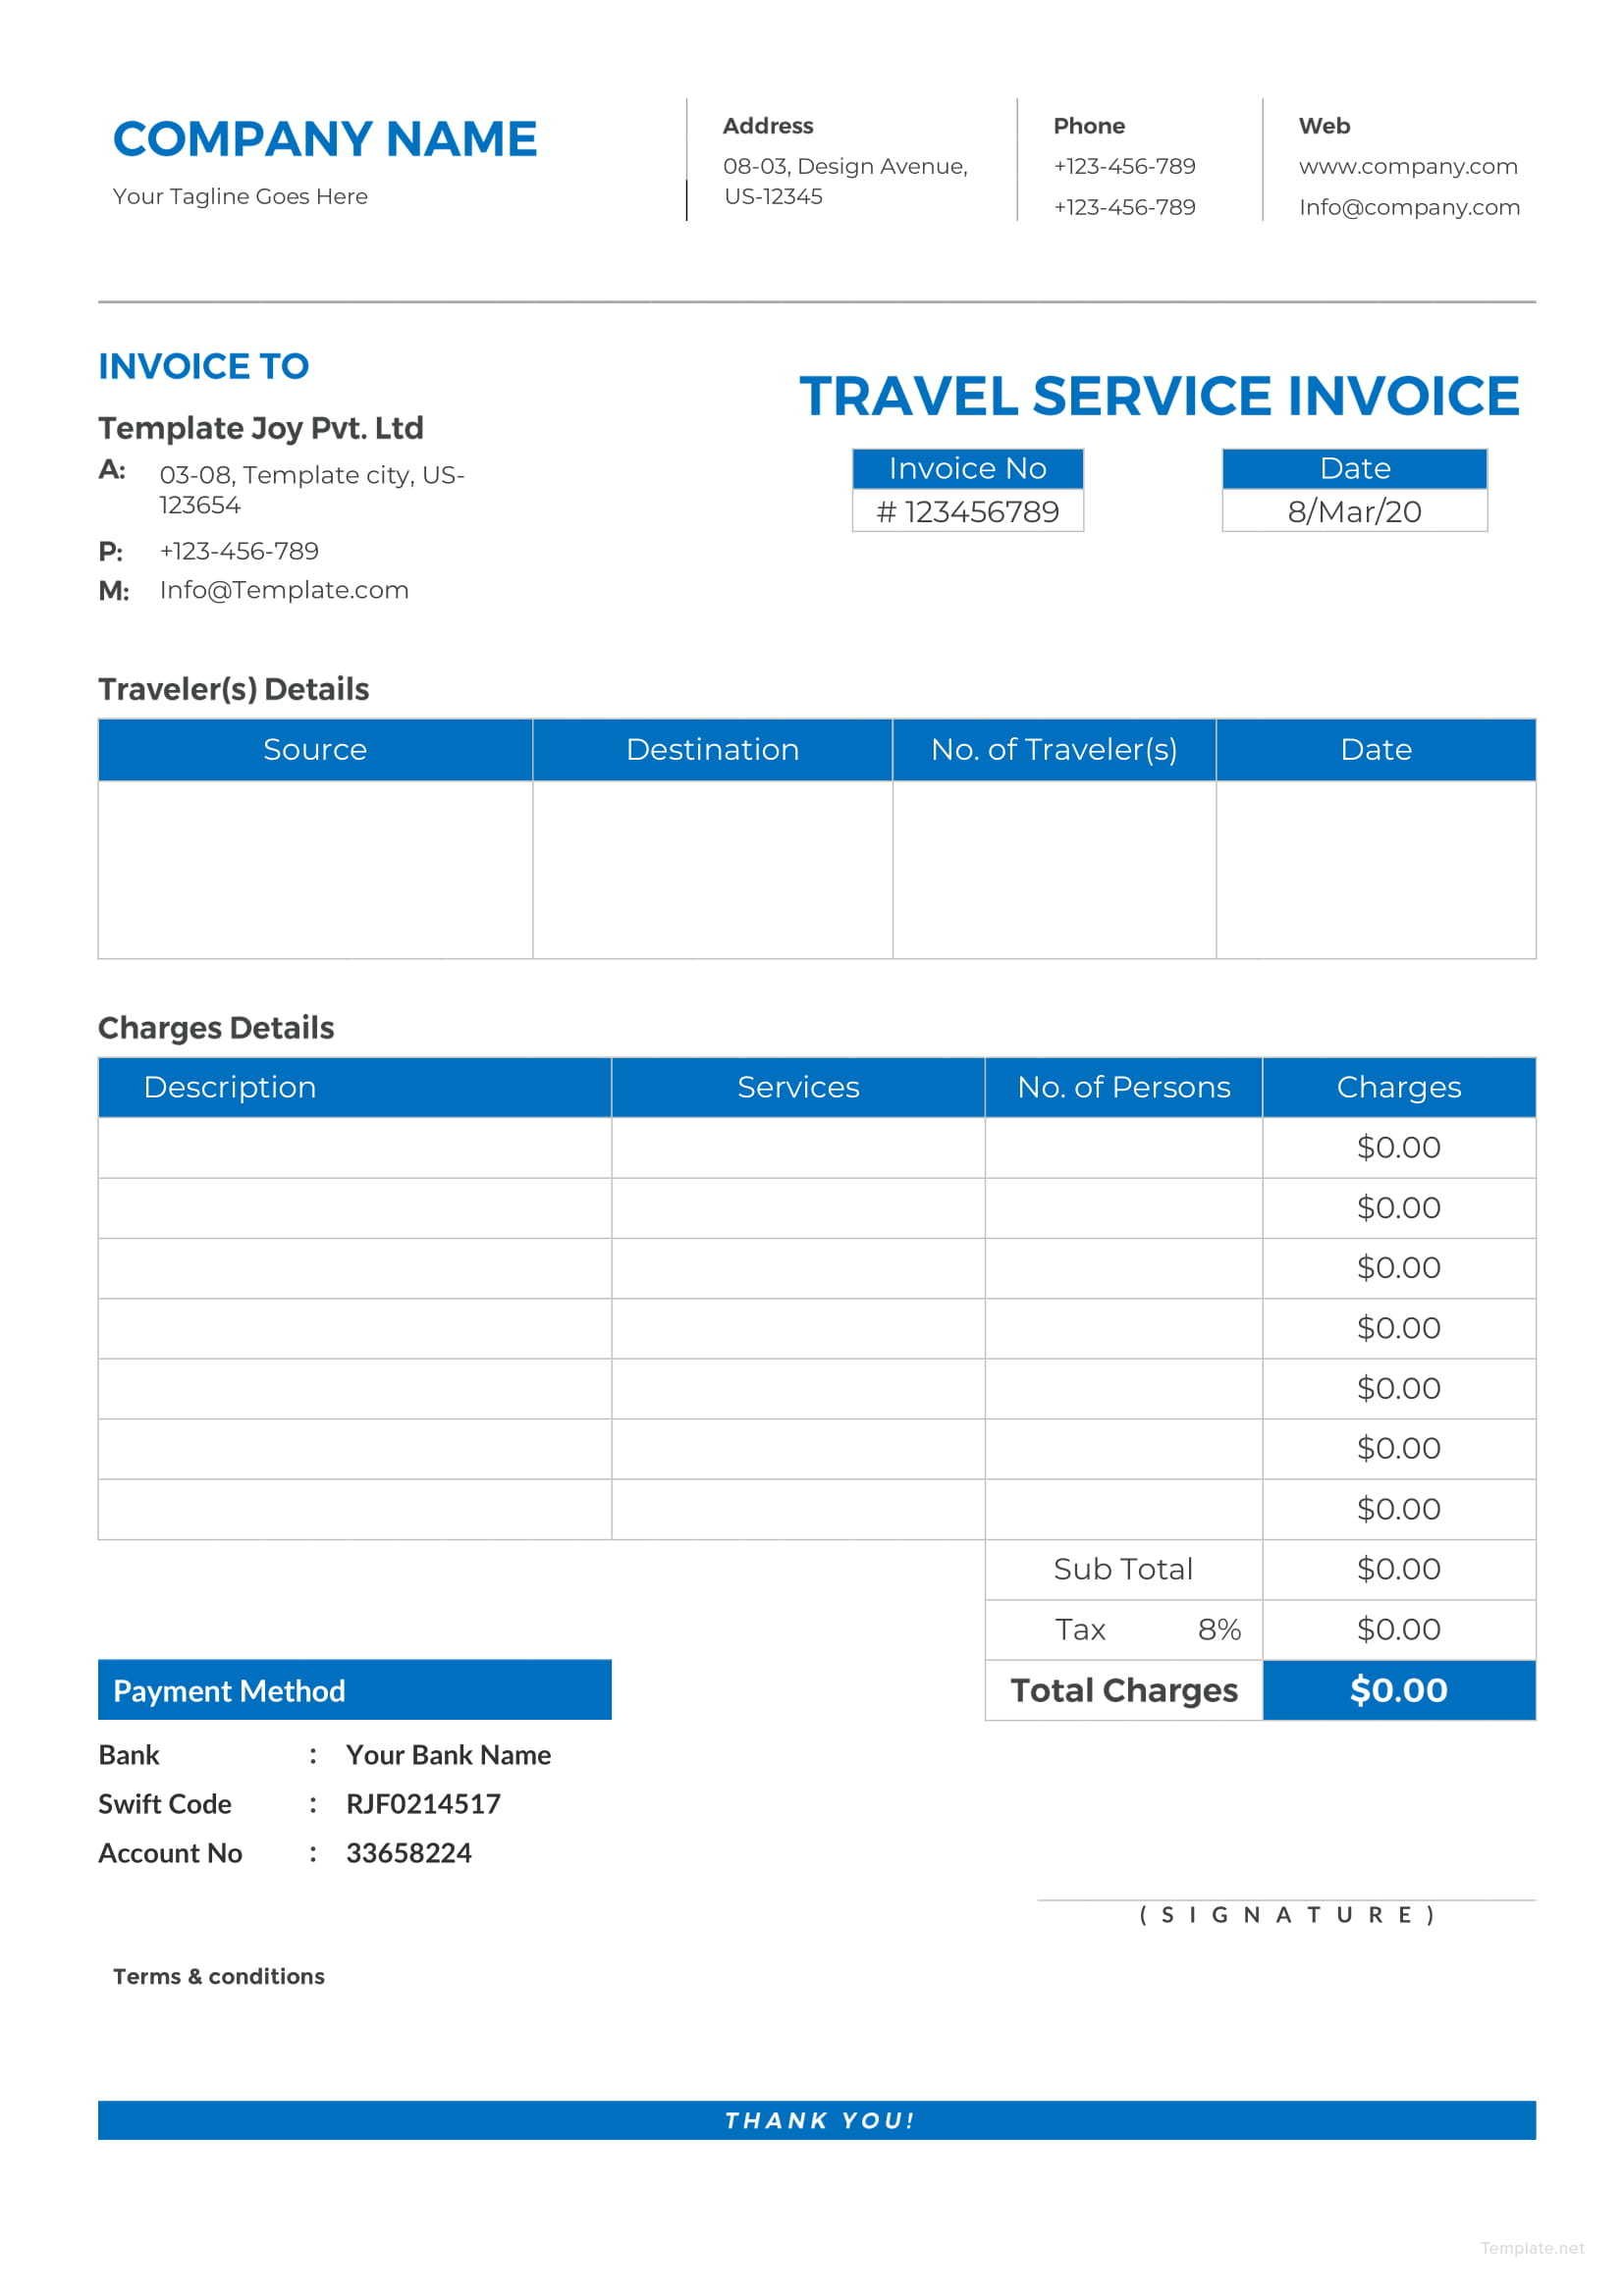 Travel Service in Invoice Template in Microsoft Word, Excel